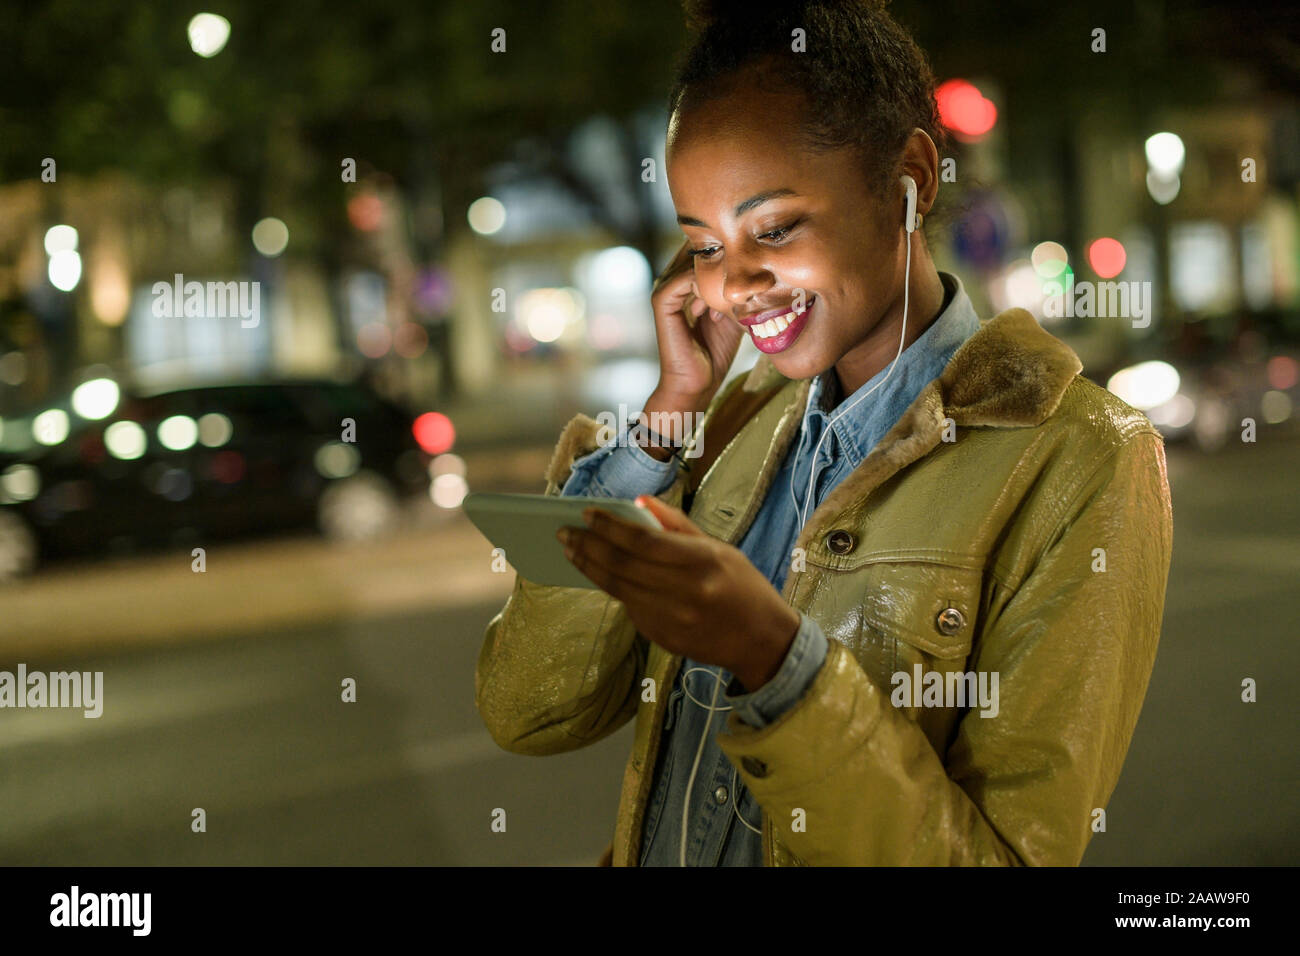 Portrait of smiling young woman using earphones and smartphone in the city by night, Lisbon, Portugal Stock Photo